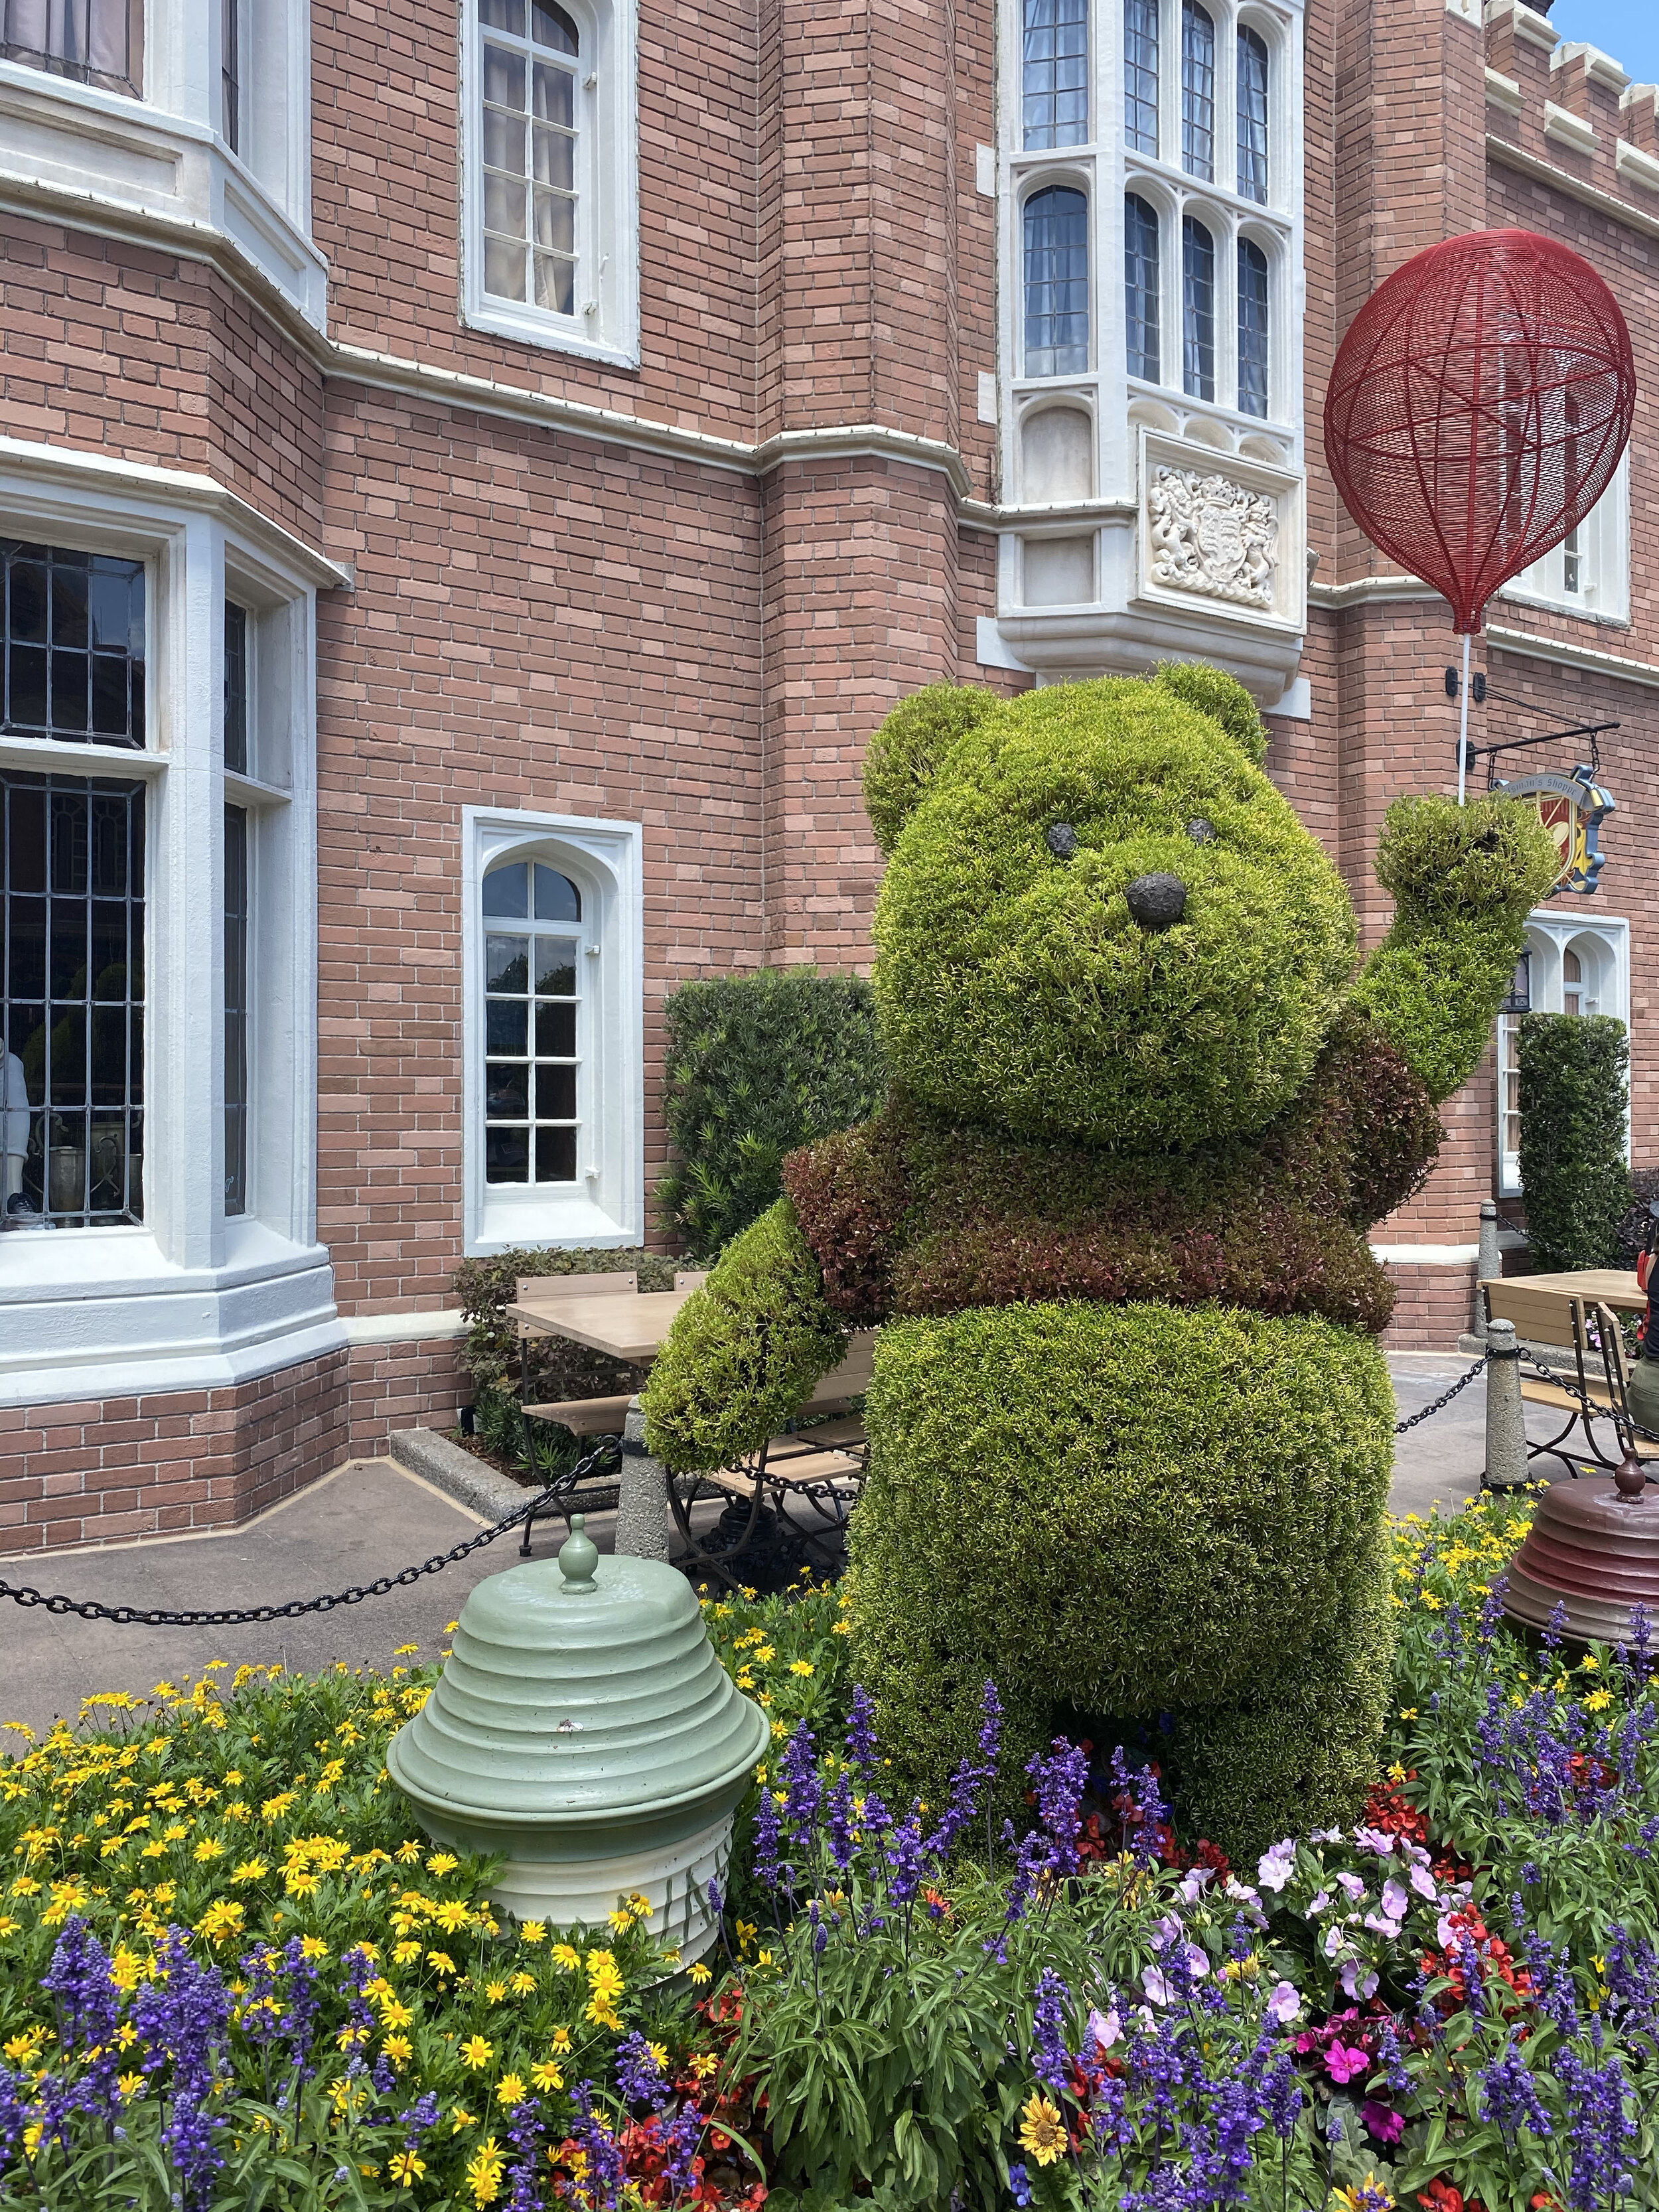 Topiaries at Disney’s Flower and Garden Festival at Epcot